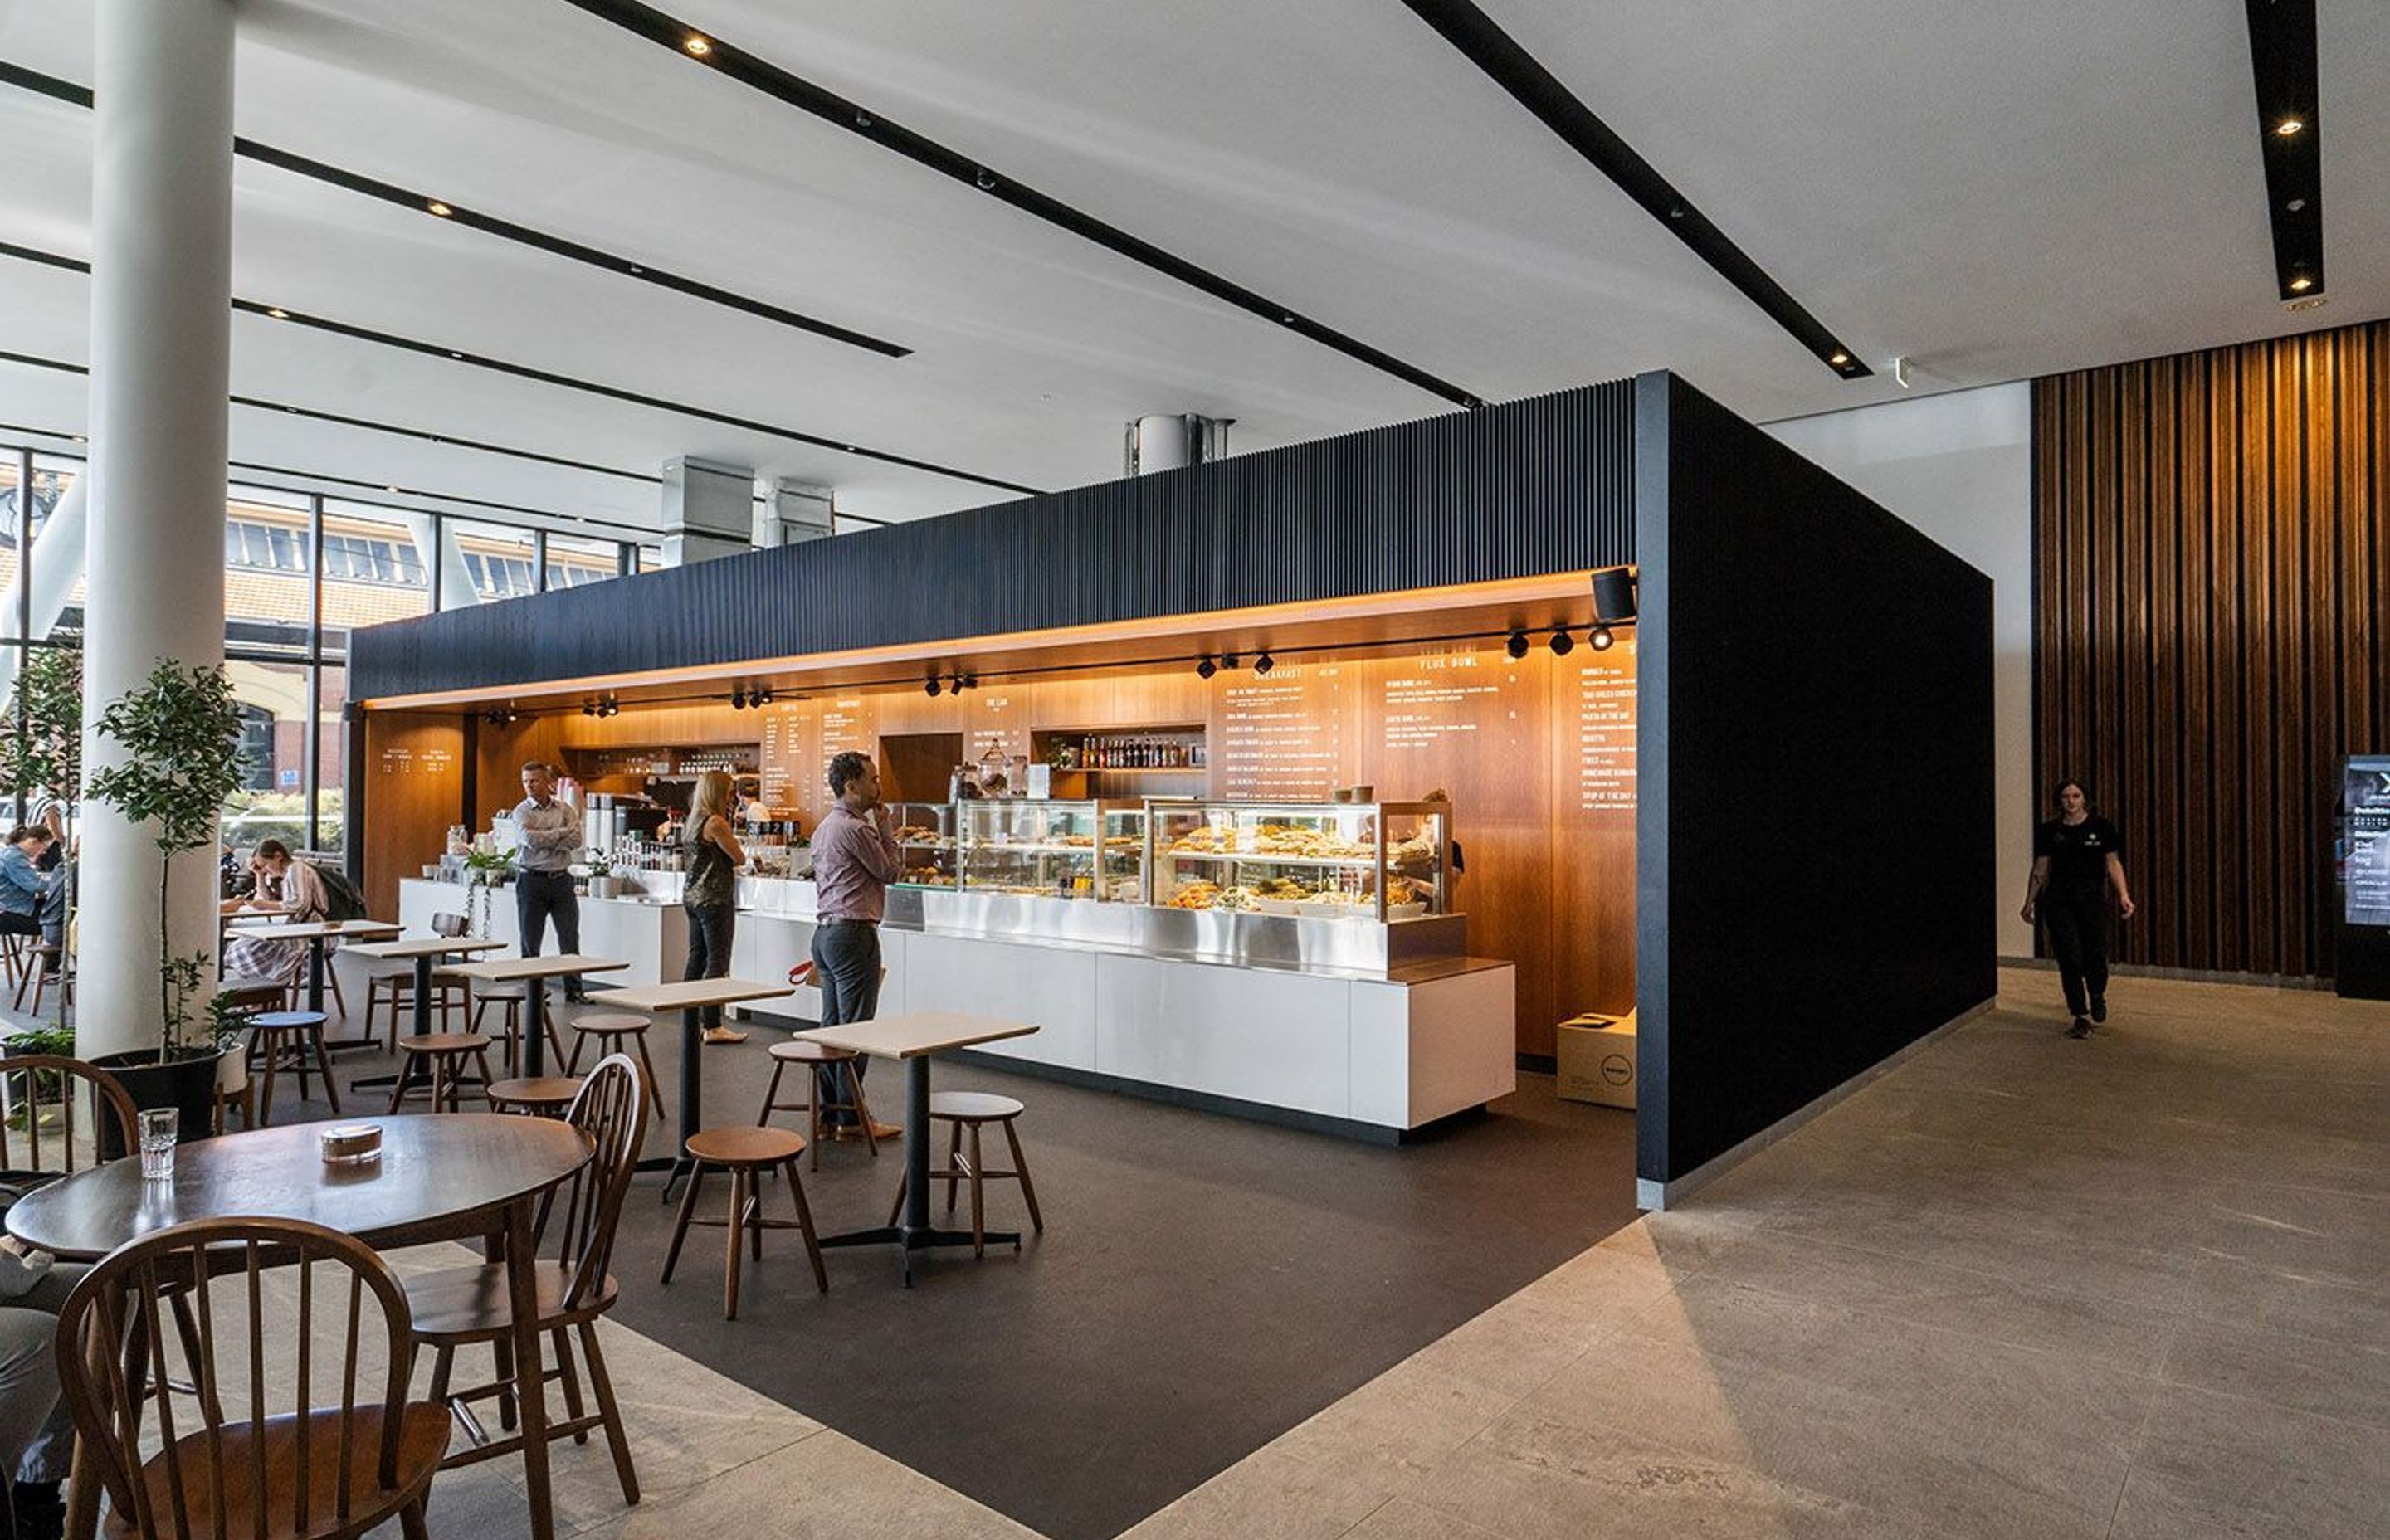 Located inside New Zealand’s most seismic-resistant tall building, XXCQ cafe sit prestigiously inside the ground lobby space of the landmark Wellington building.